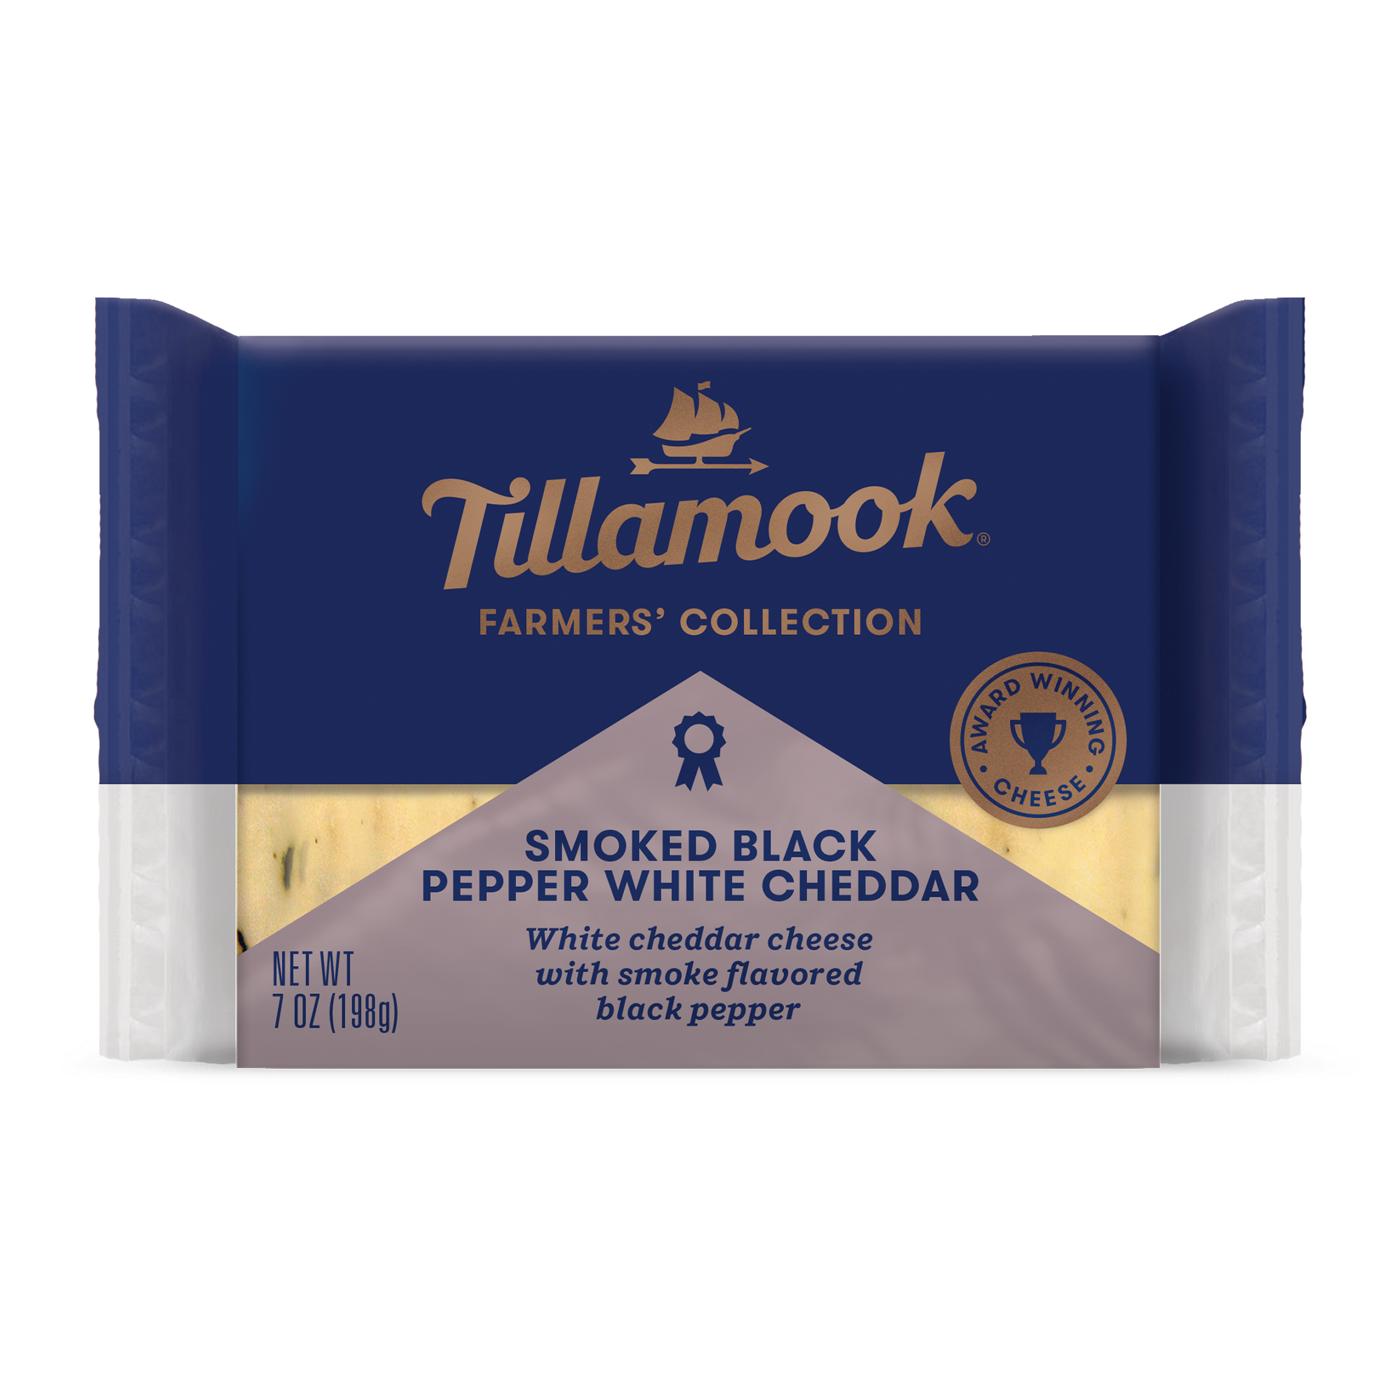 Tillamook Farmers' Collection Smoked Black Pepper White Cheddar Cheese; image 1 of 6